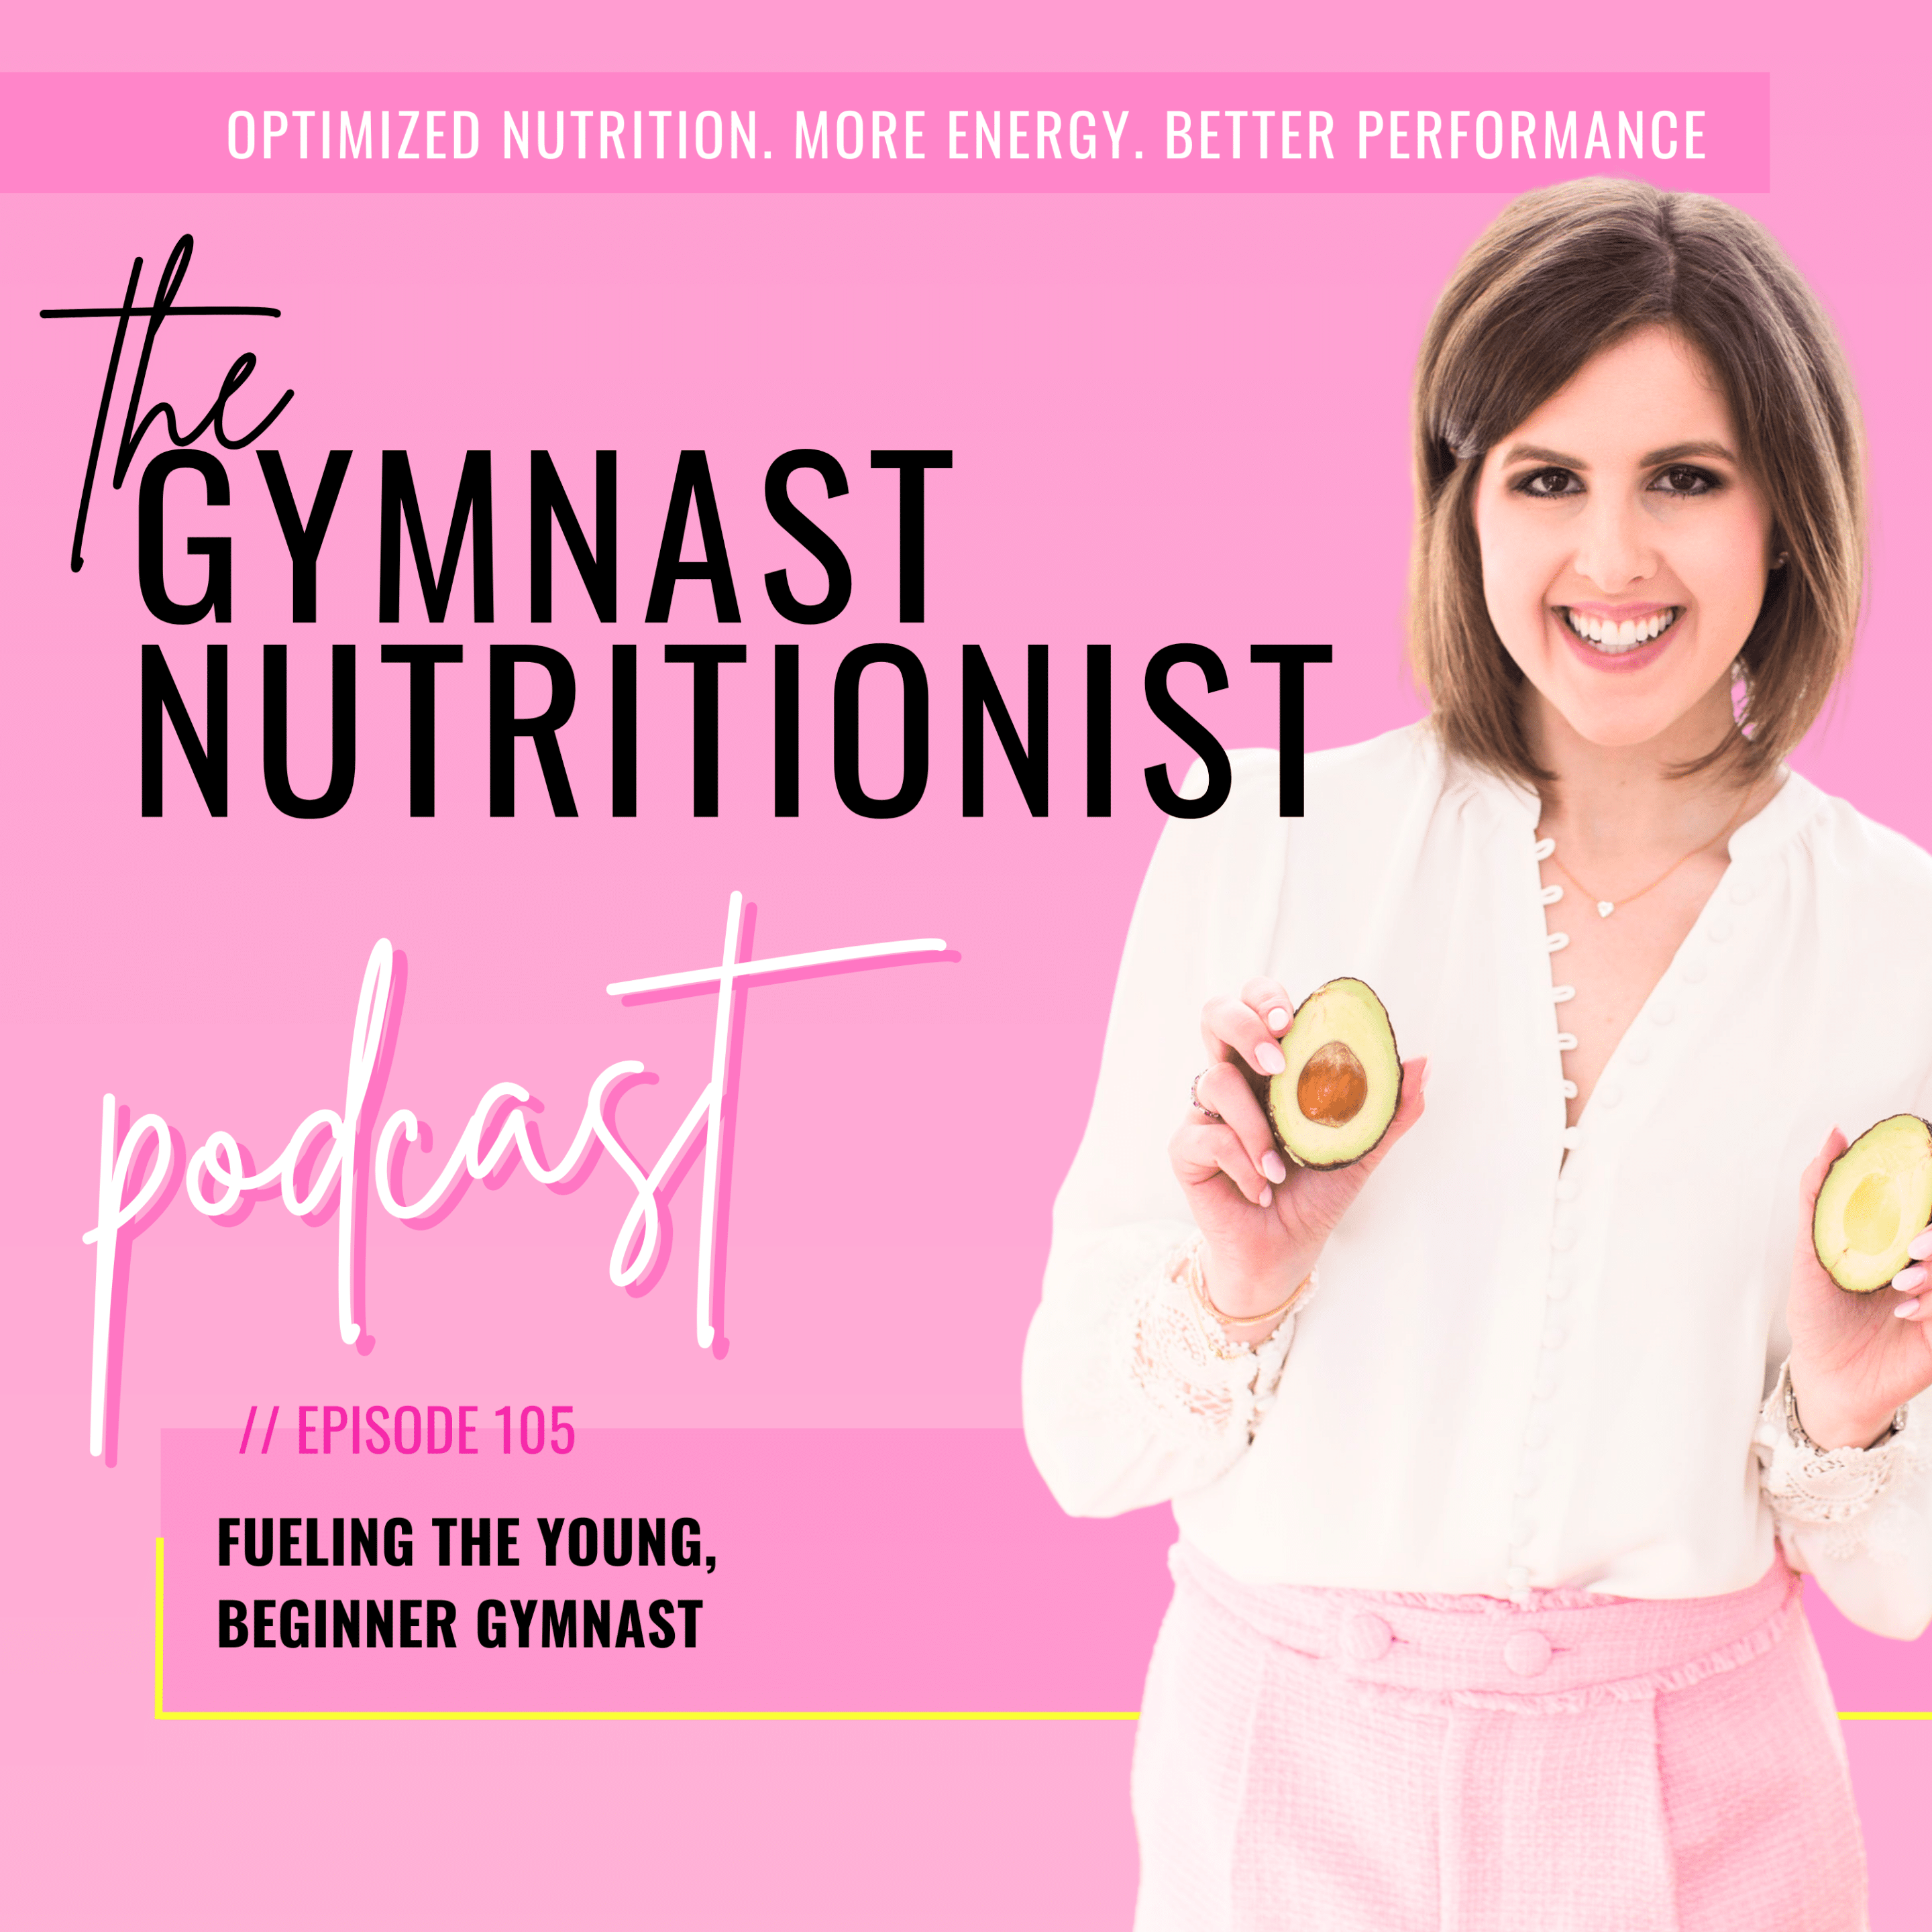 Episode 105 Fueling the Young, Beginner Gymnast